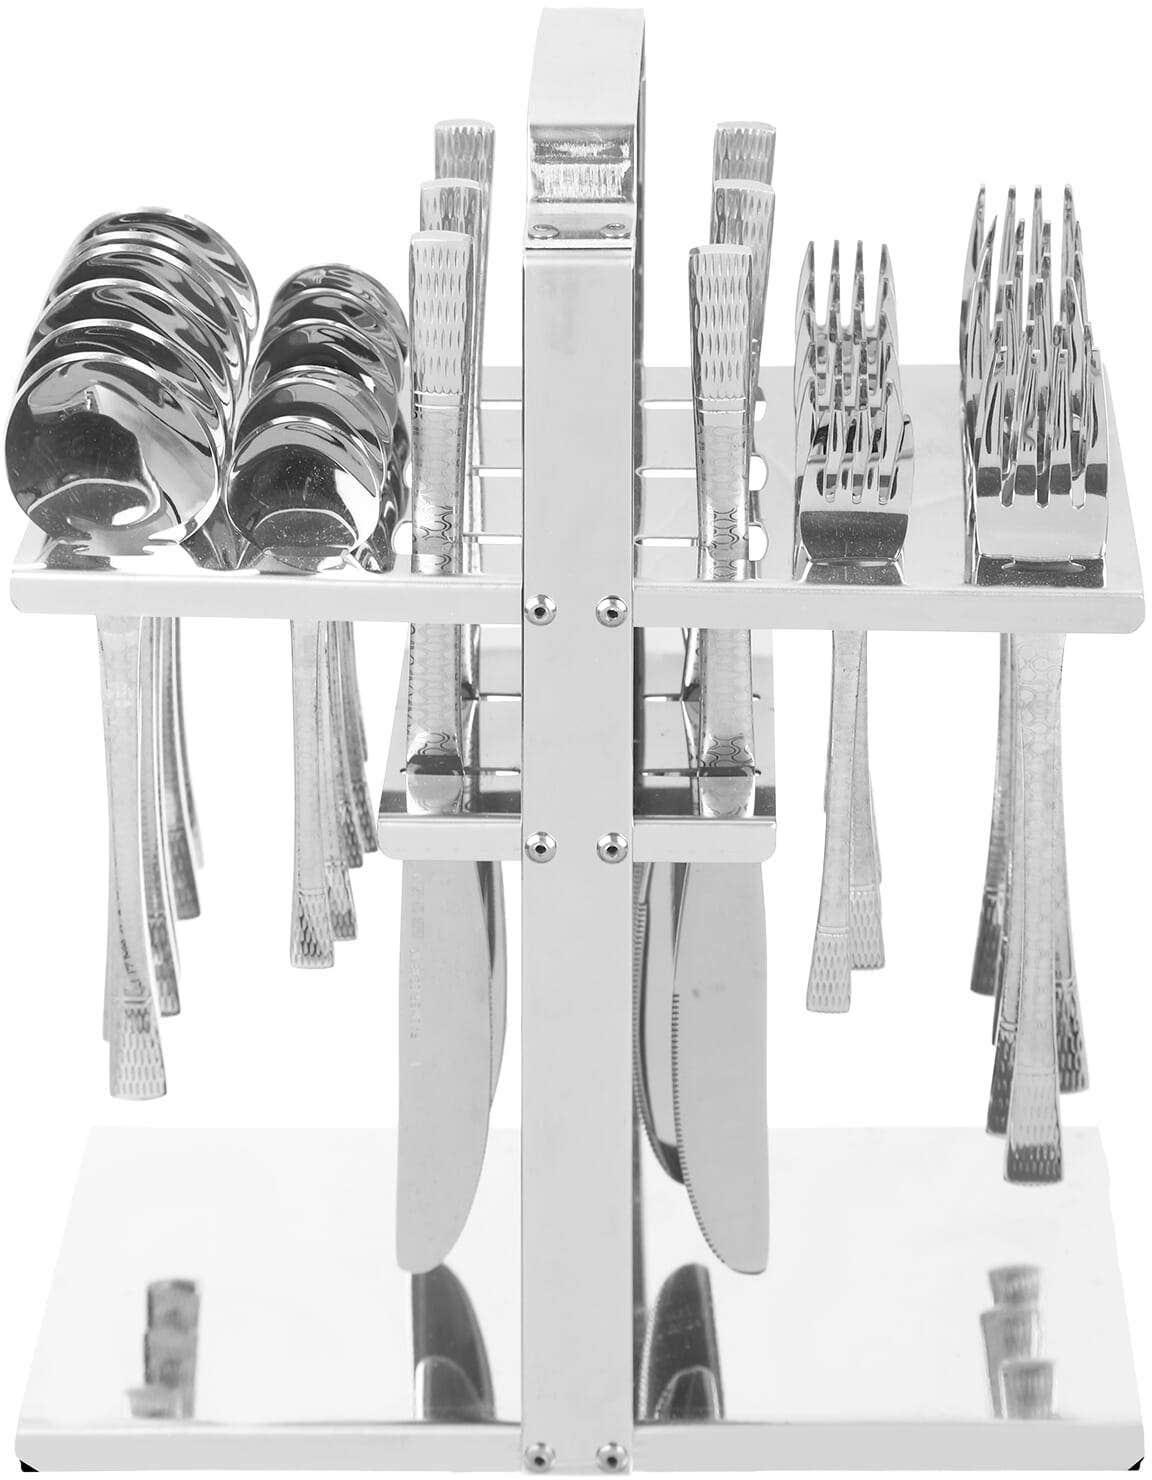 Get City Star Stainless Steel Cutlery Set With Stand, 30 Pieces - Silver with best offers | Raneen.com